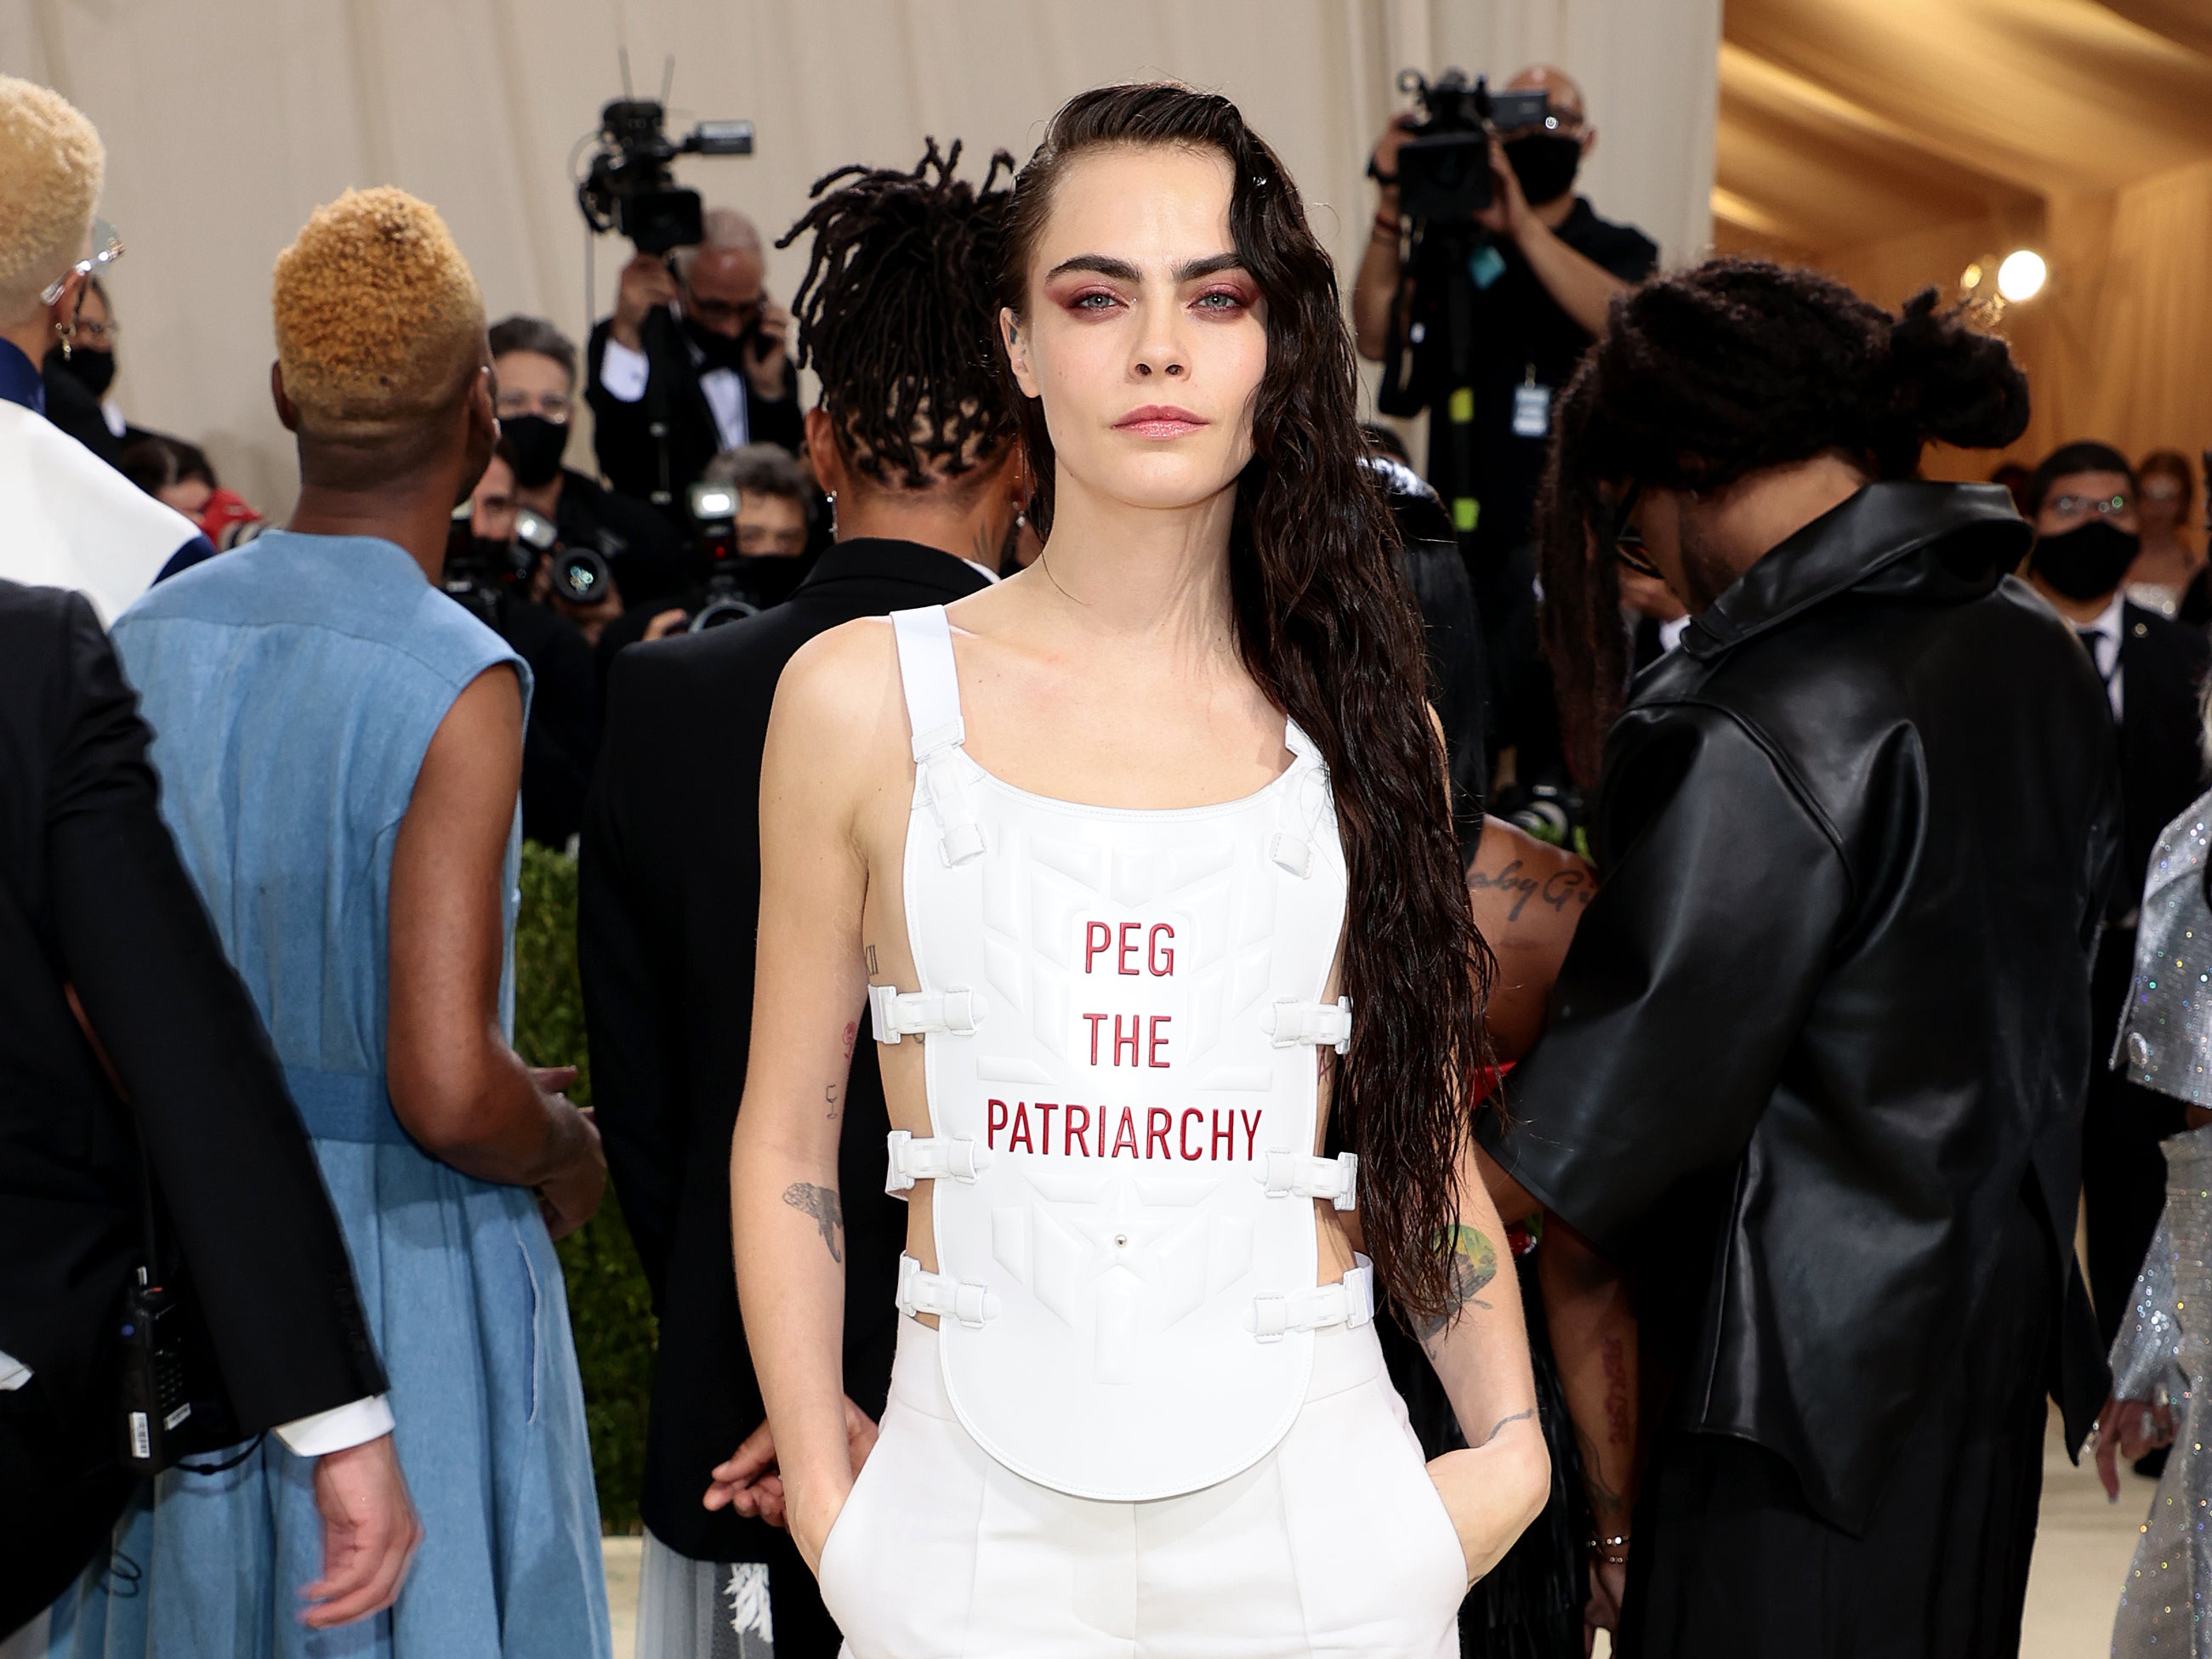 Cara Delevingne divides fans with Peg the patriarchy vest at 2021 Met Gala The Independent